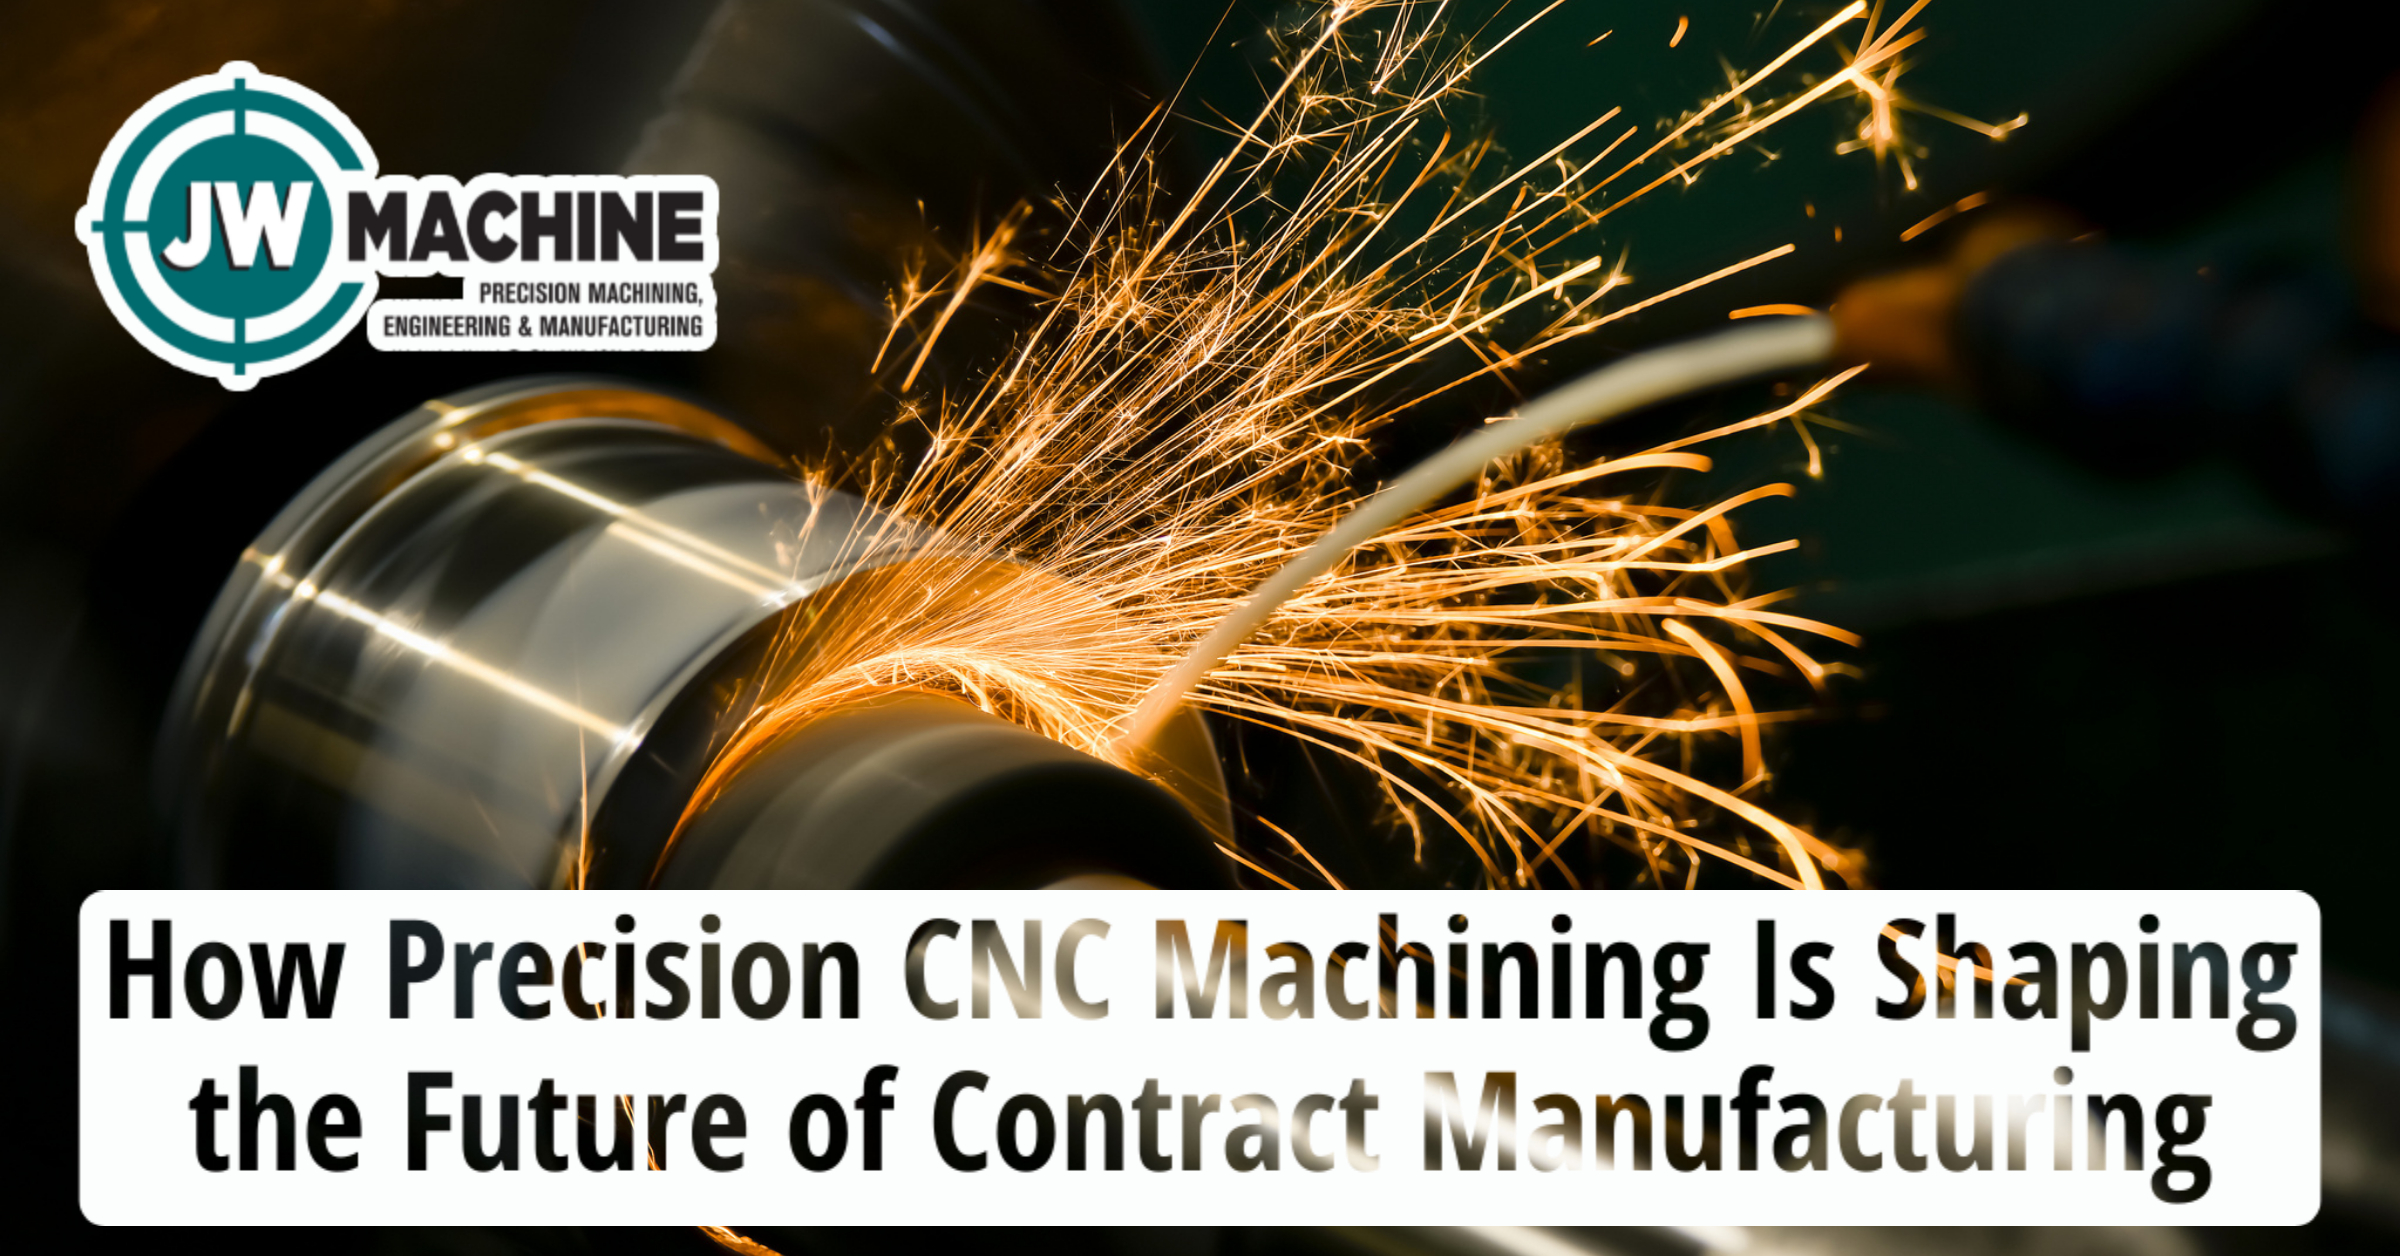 Precision CNC Machining Is Shaping the Future